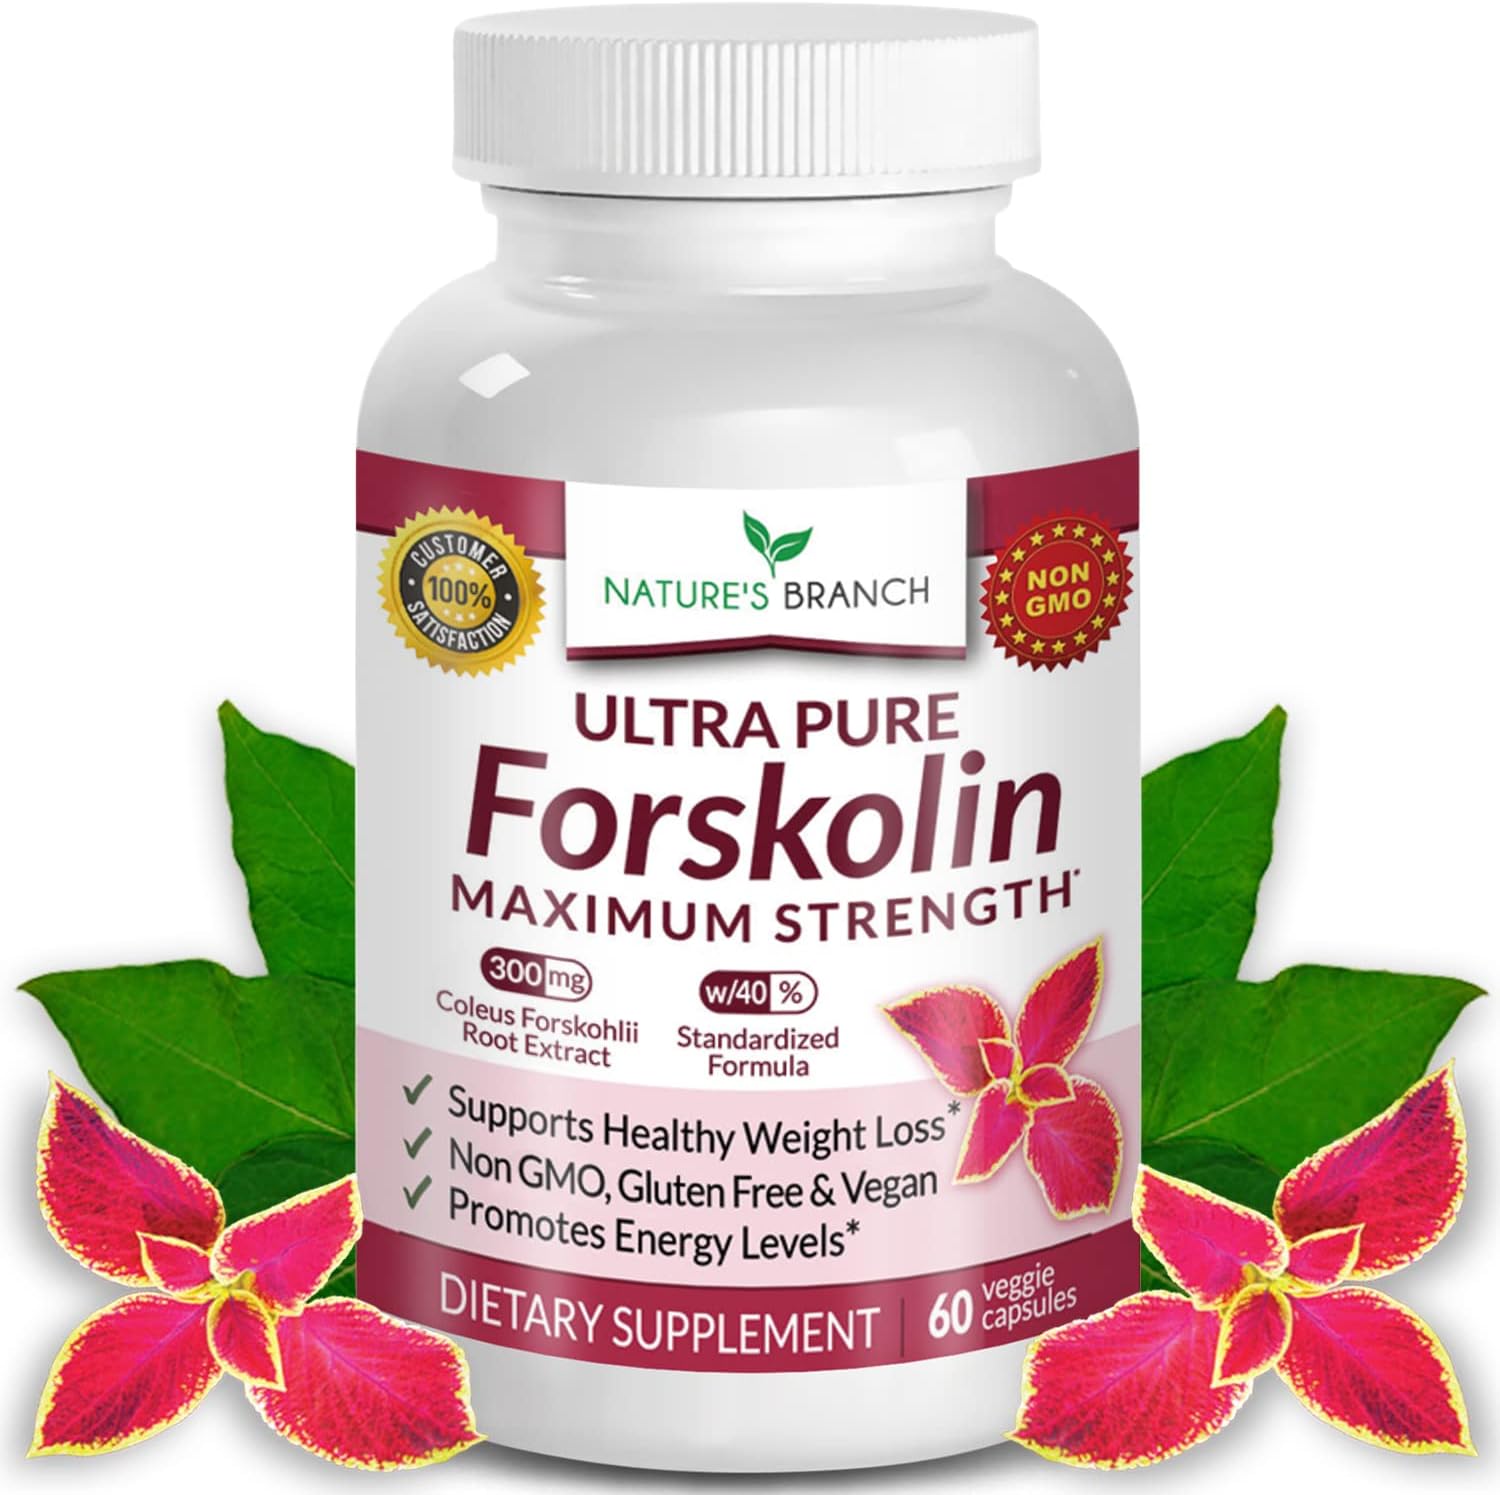 Premium 100% Ultra Pure Forskolin for Weight Loss Max Strength w/ 40% Standardized Coleus Forskohlii Root Extract Powder Belly Buster Supplement - Extreme Keto Advanced Boost Complex - 60 Diet Pills